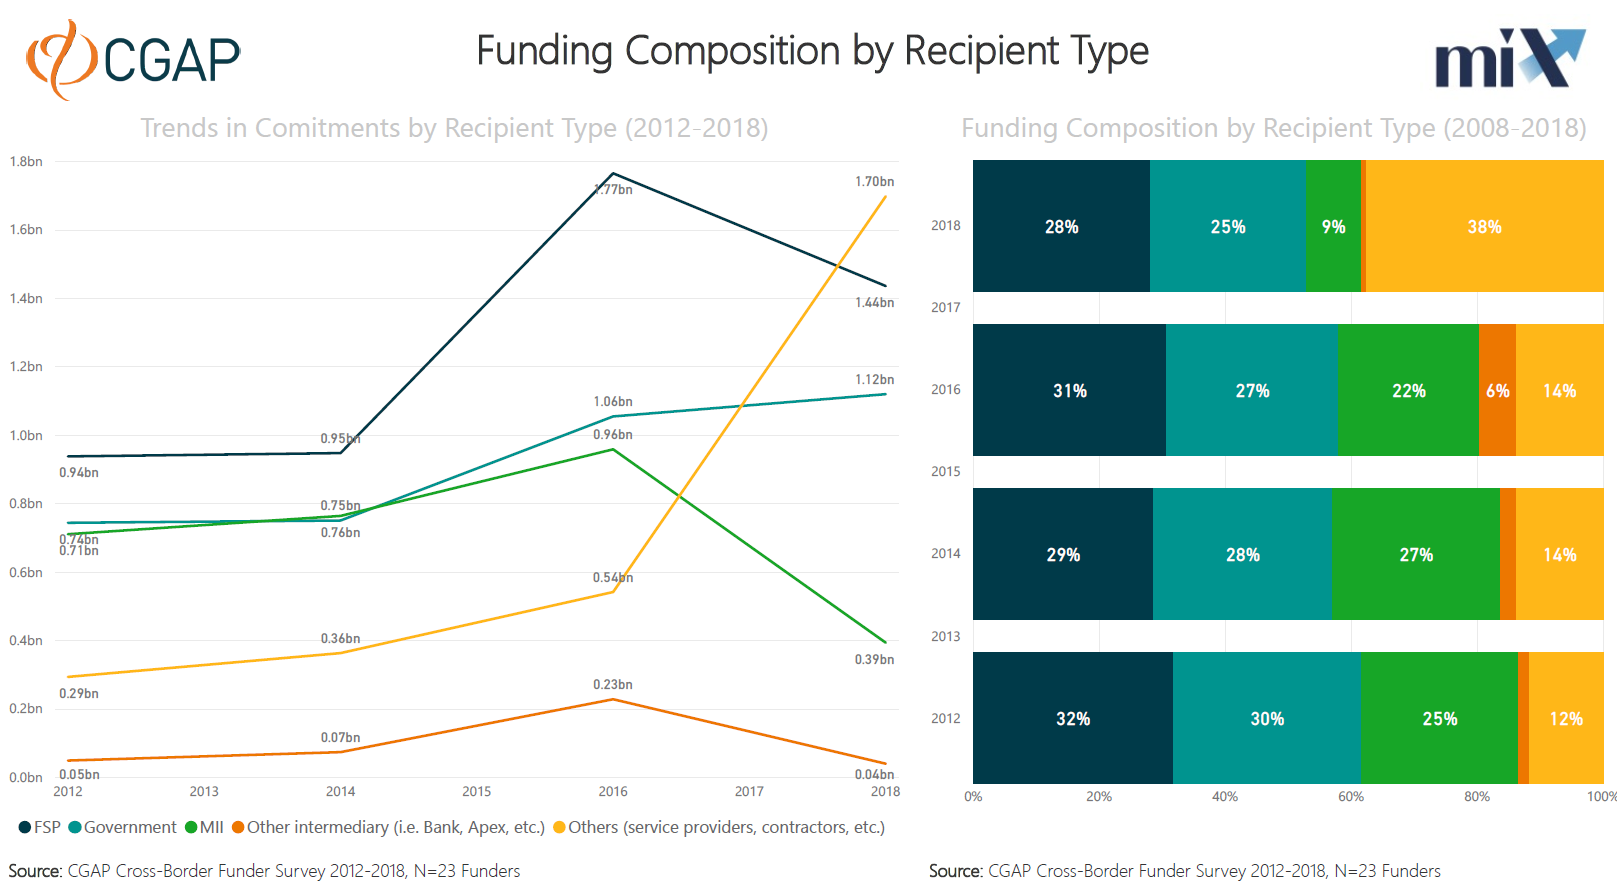 Who do funders fund in Sub-Saharan Africa? (Recipients)